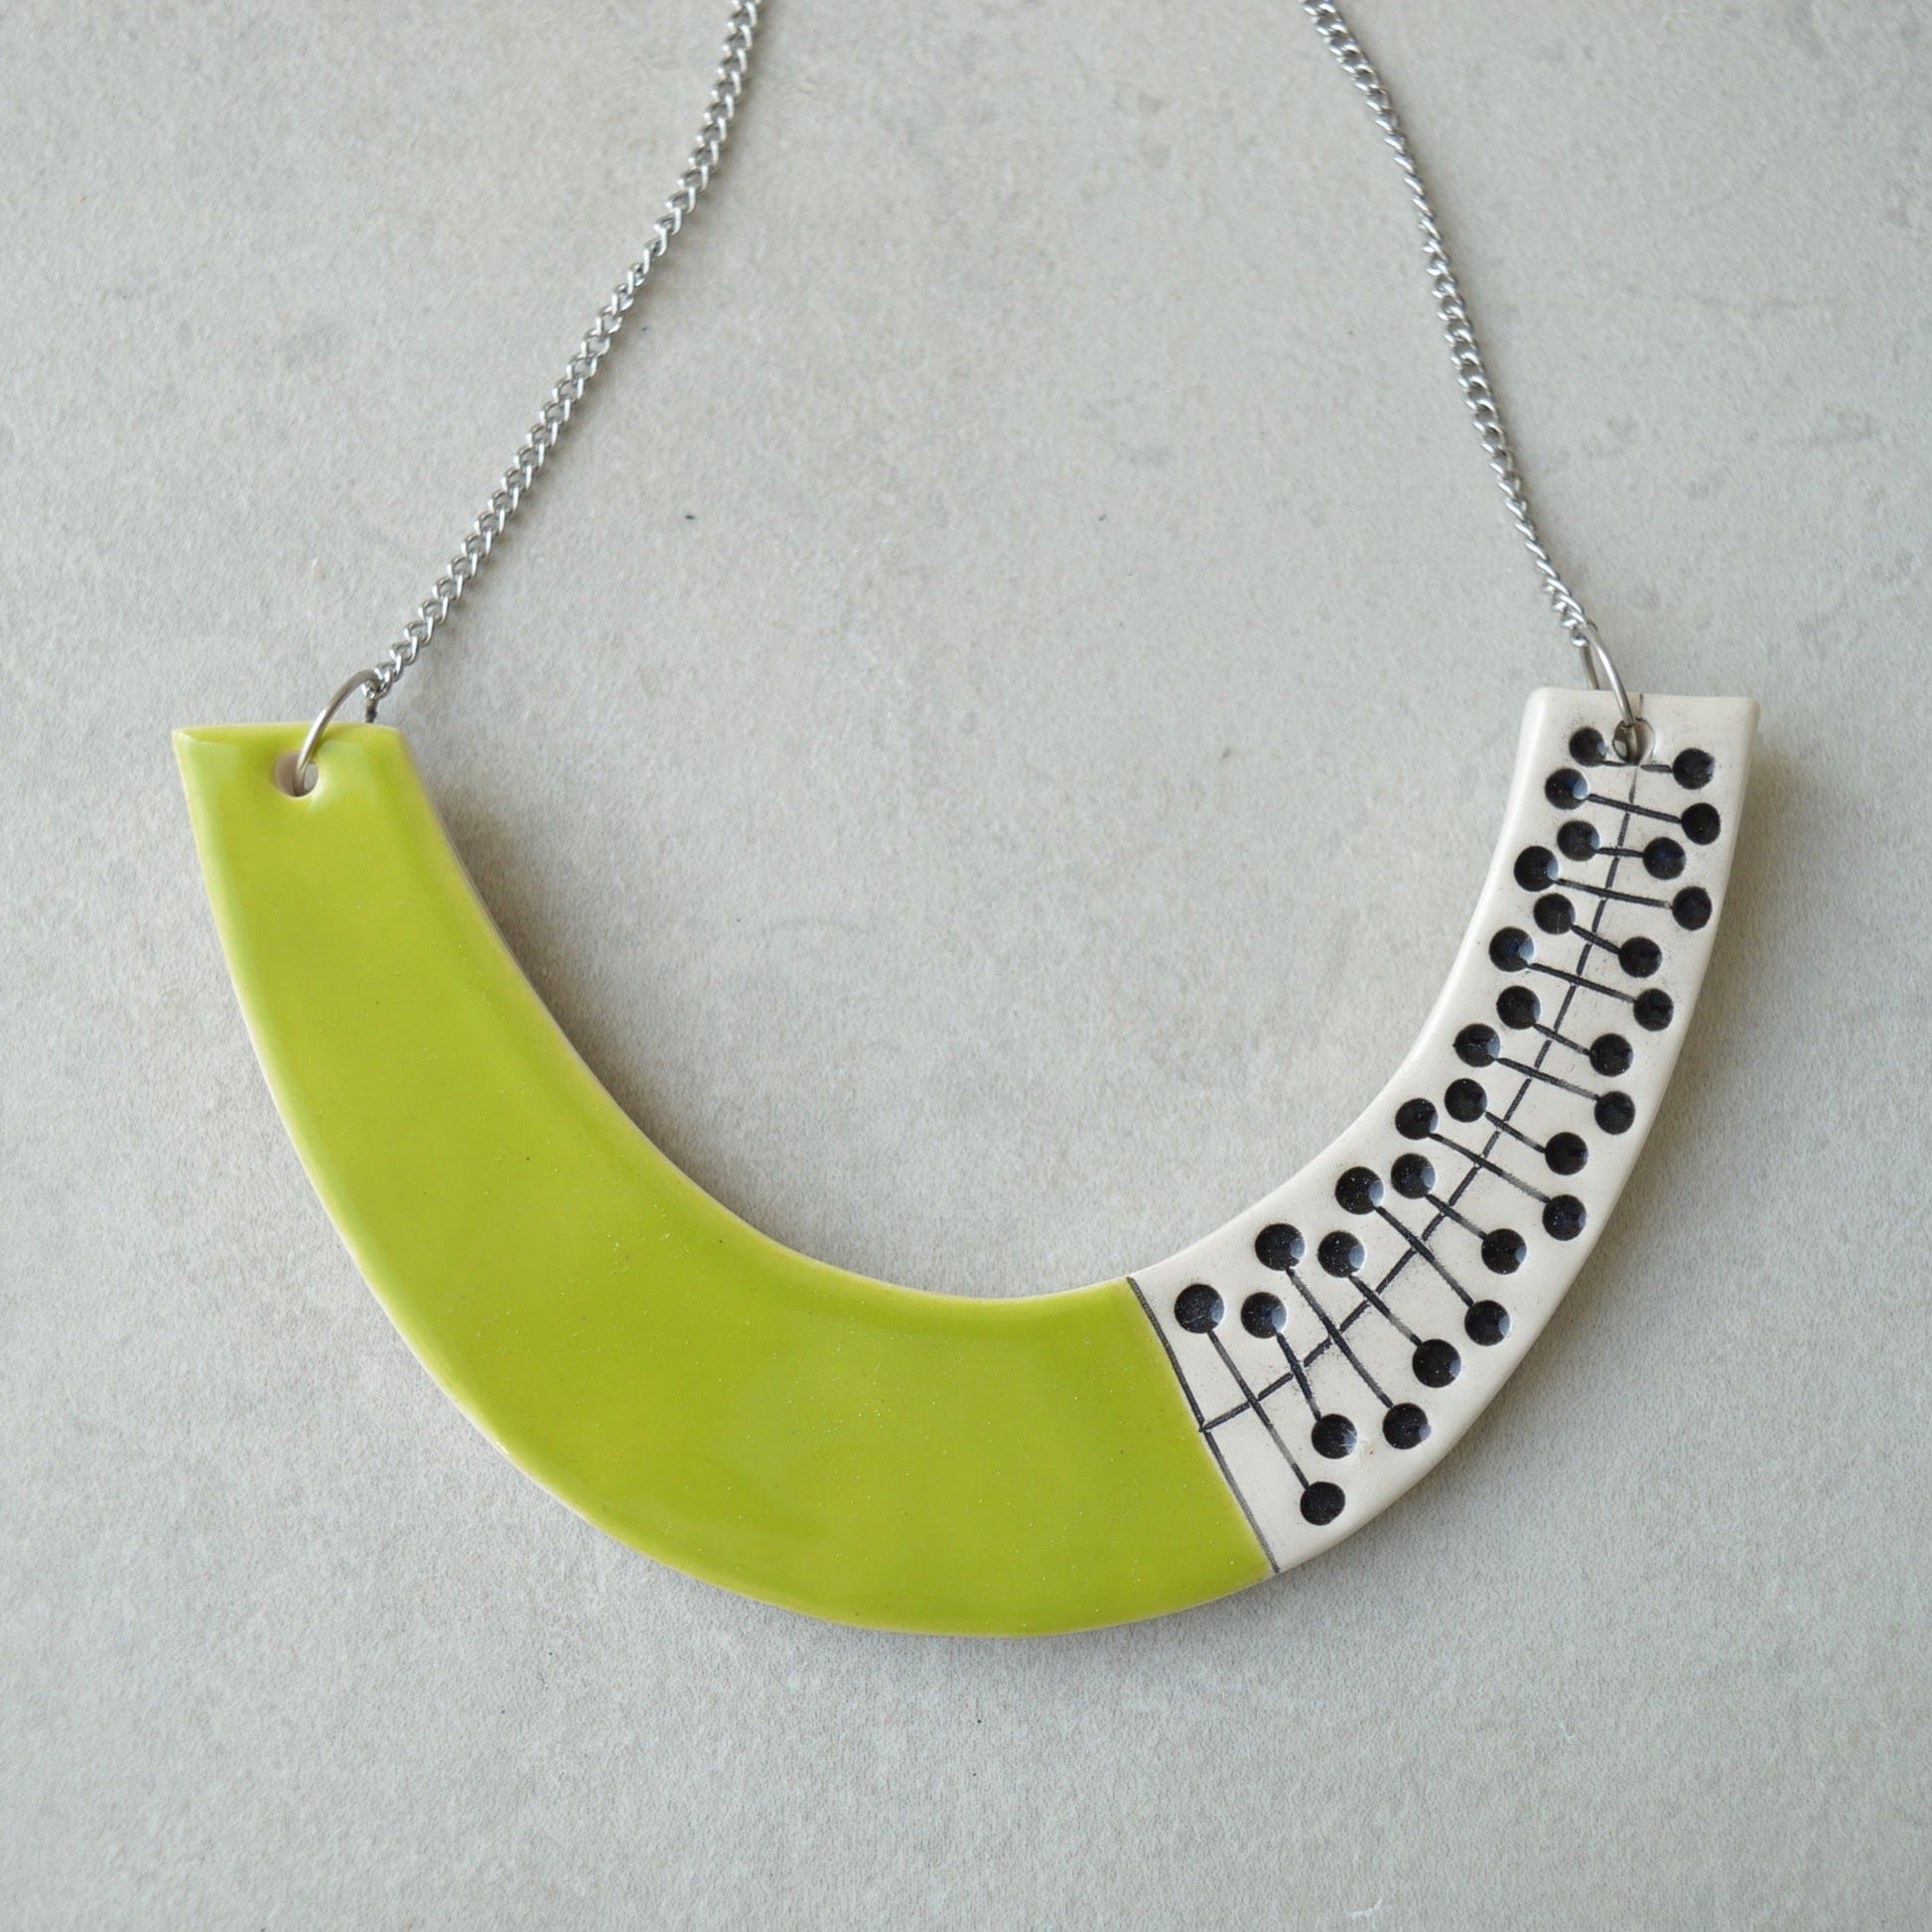 lime green ceramic necklace